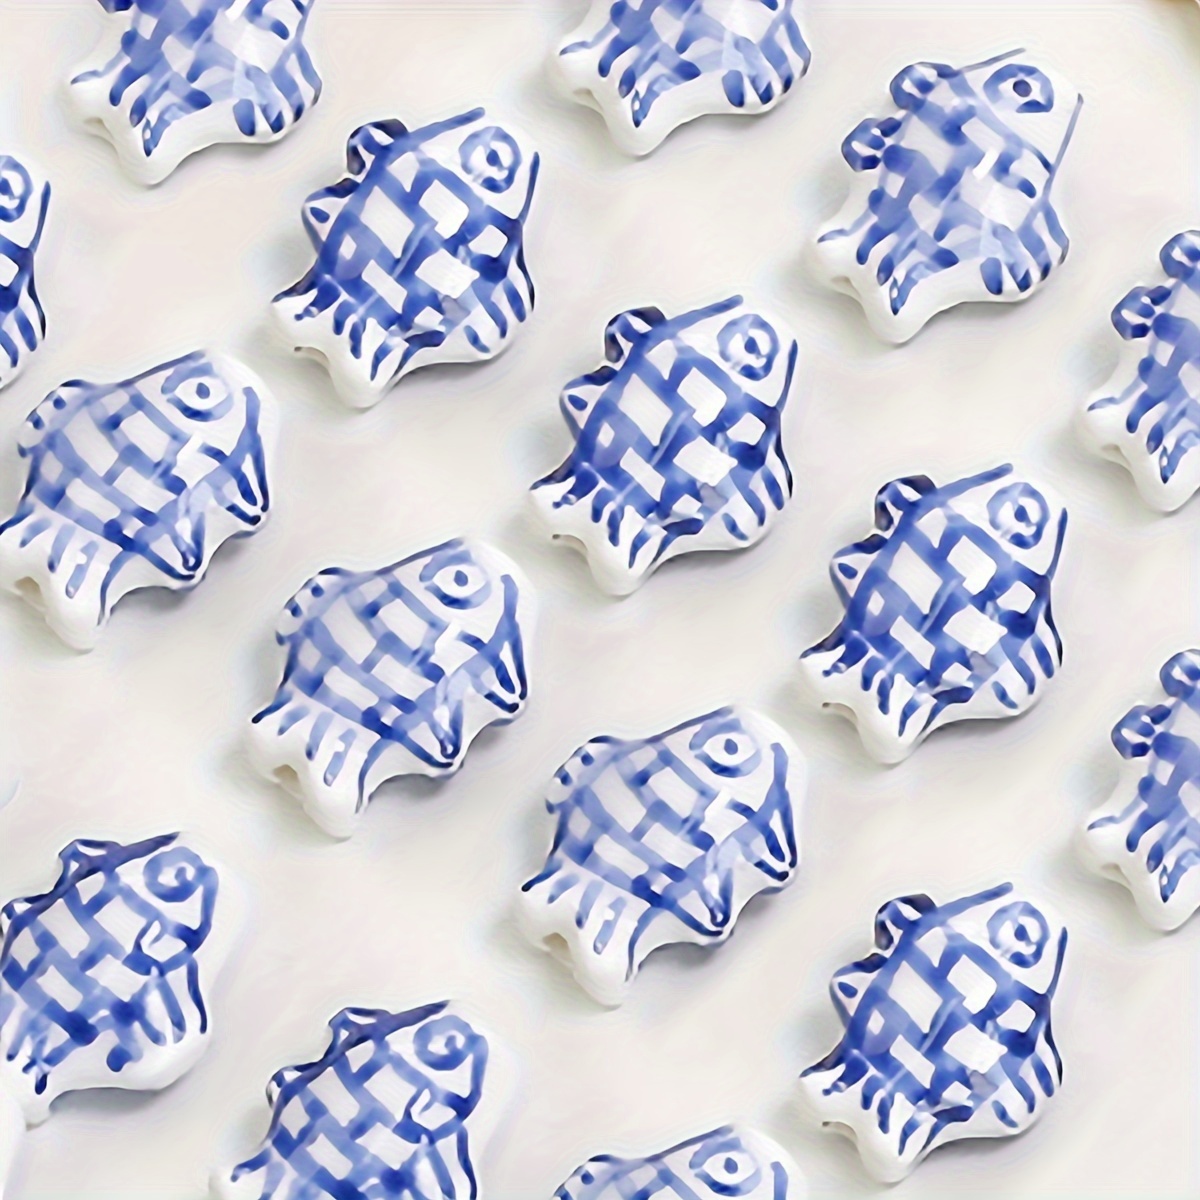 

5pcs/set 1.5x1.2cm Hand-painted Blue And White Porcelain Fish-shaped Ceramic Beads Diy Jewelry Making For Bracelets, Necklaces, Keychains, Colorful Ceramic Beaded Decors Accessories